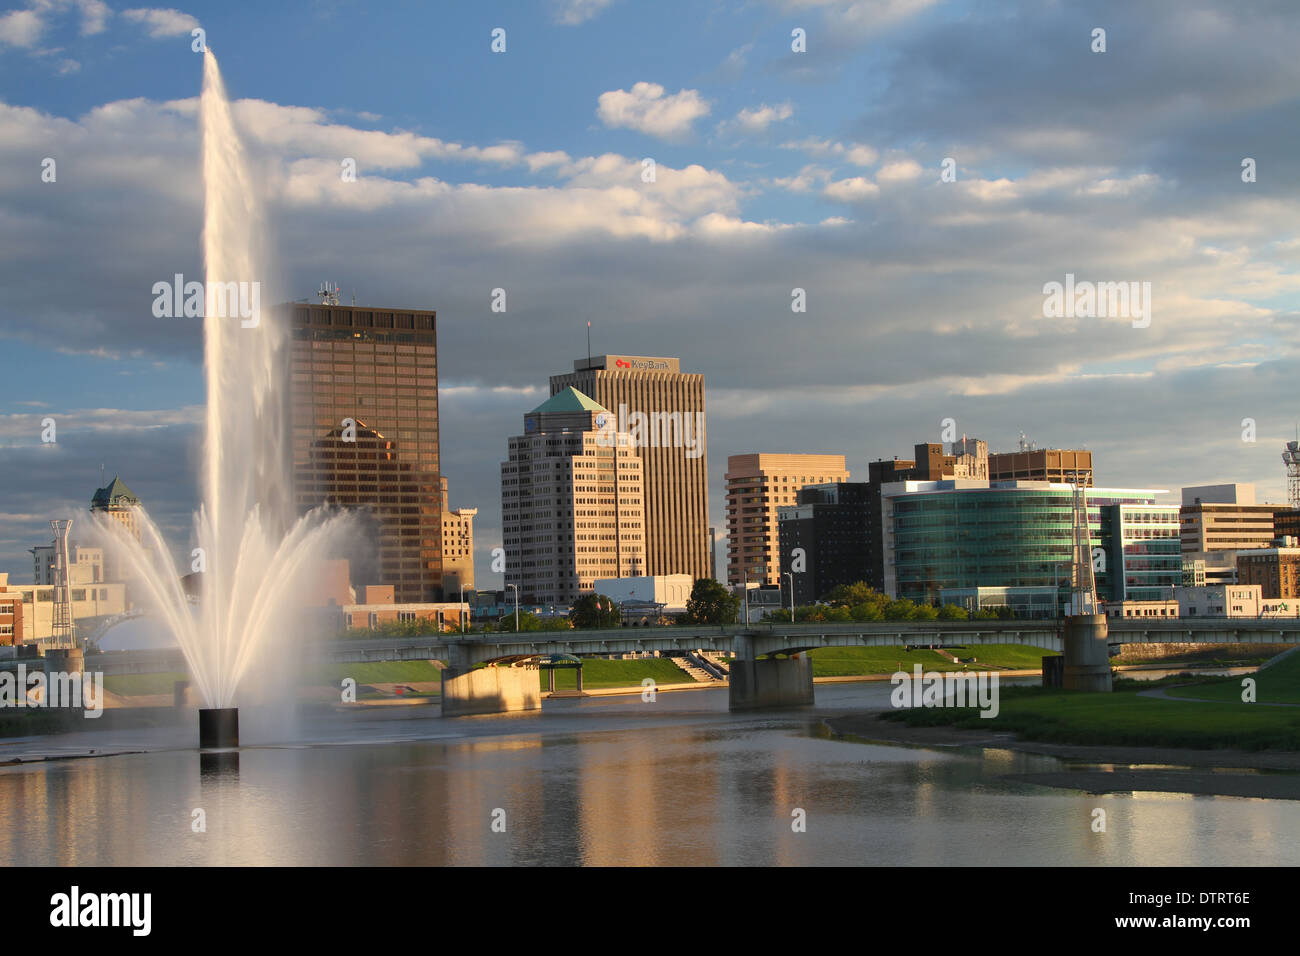 Water Fountain in River and Cityscape of Dayton, Ohio, USA. Stock Photo